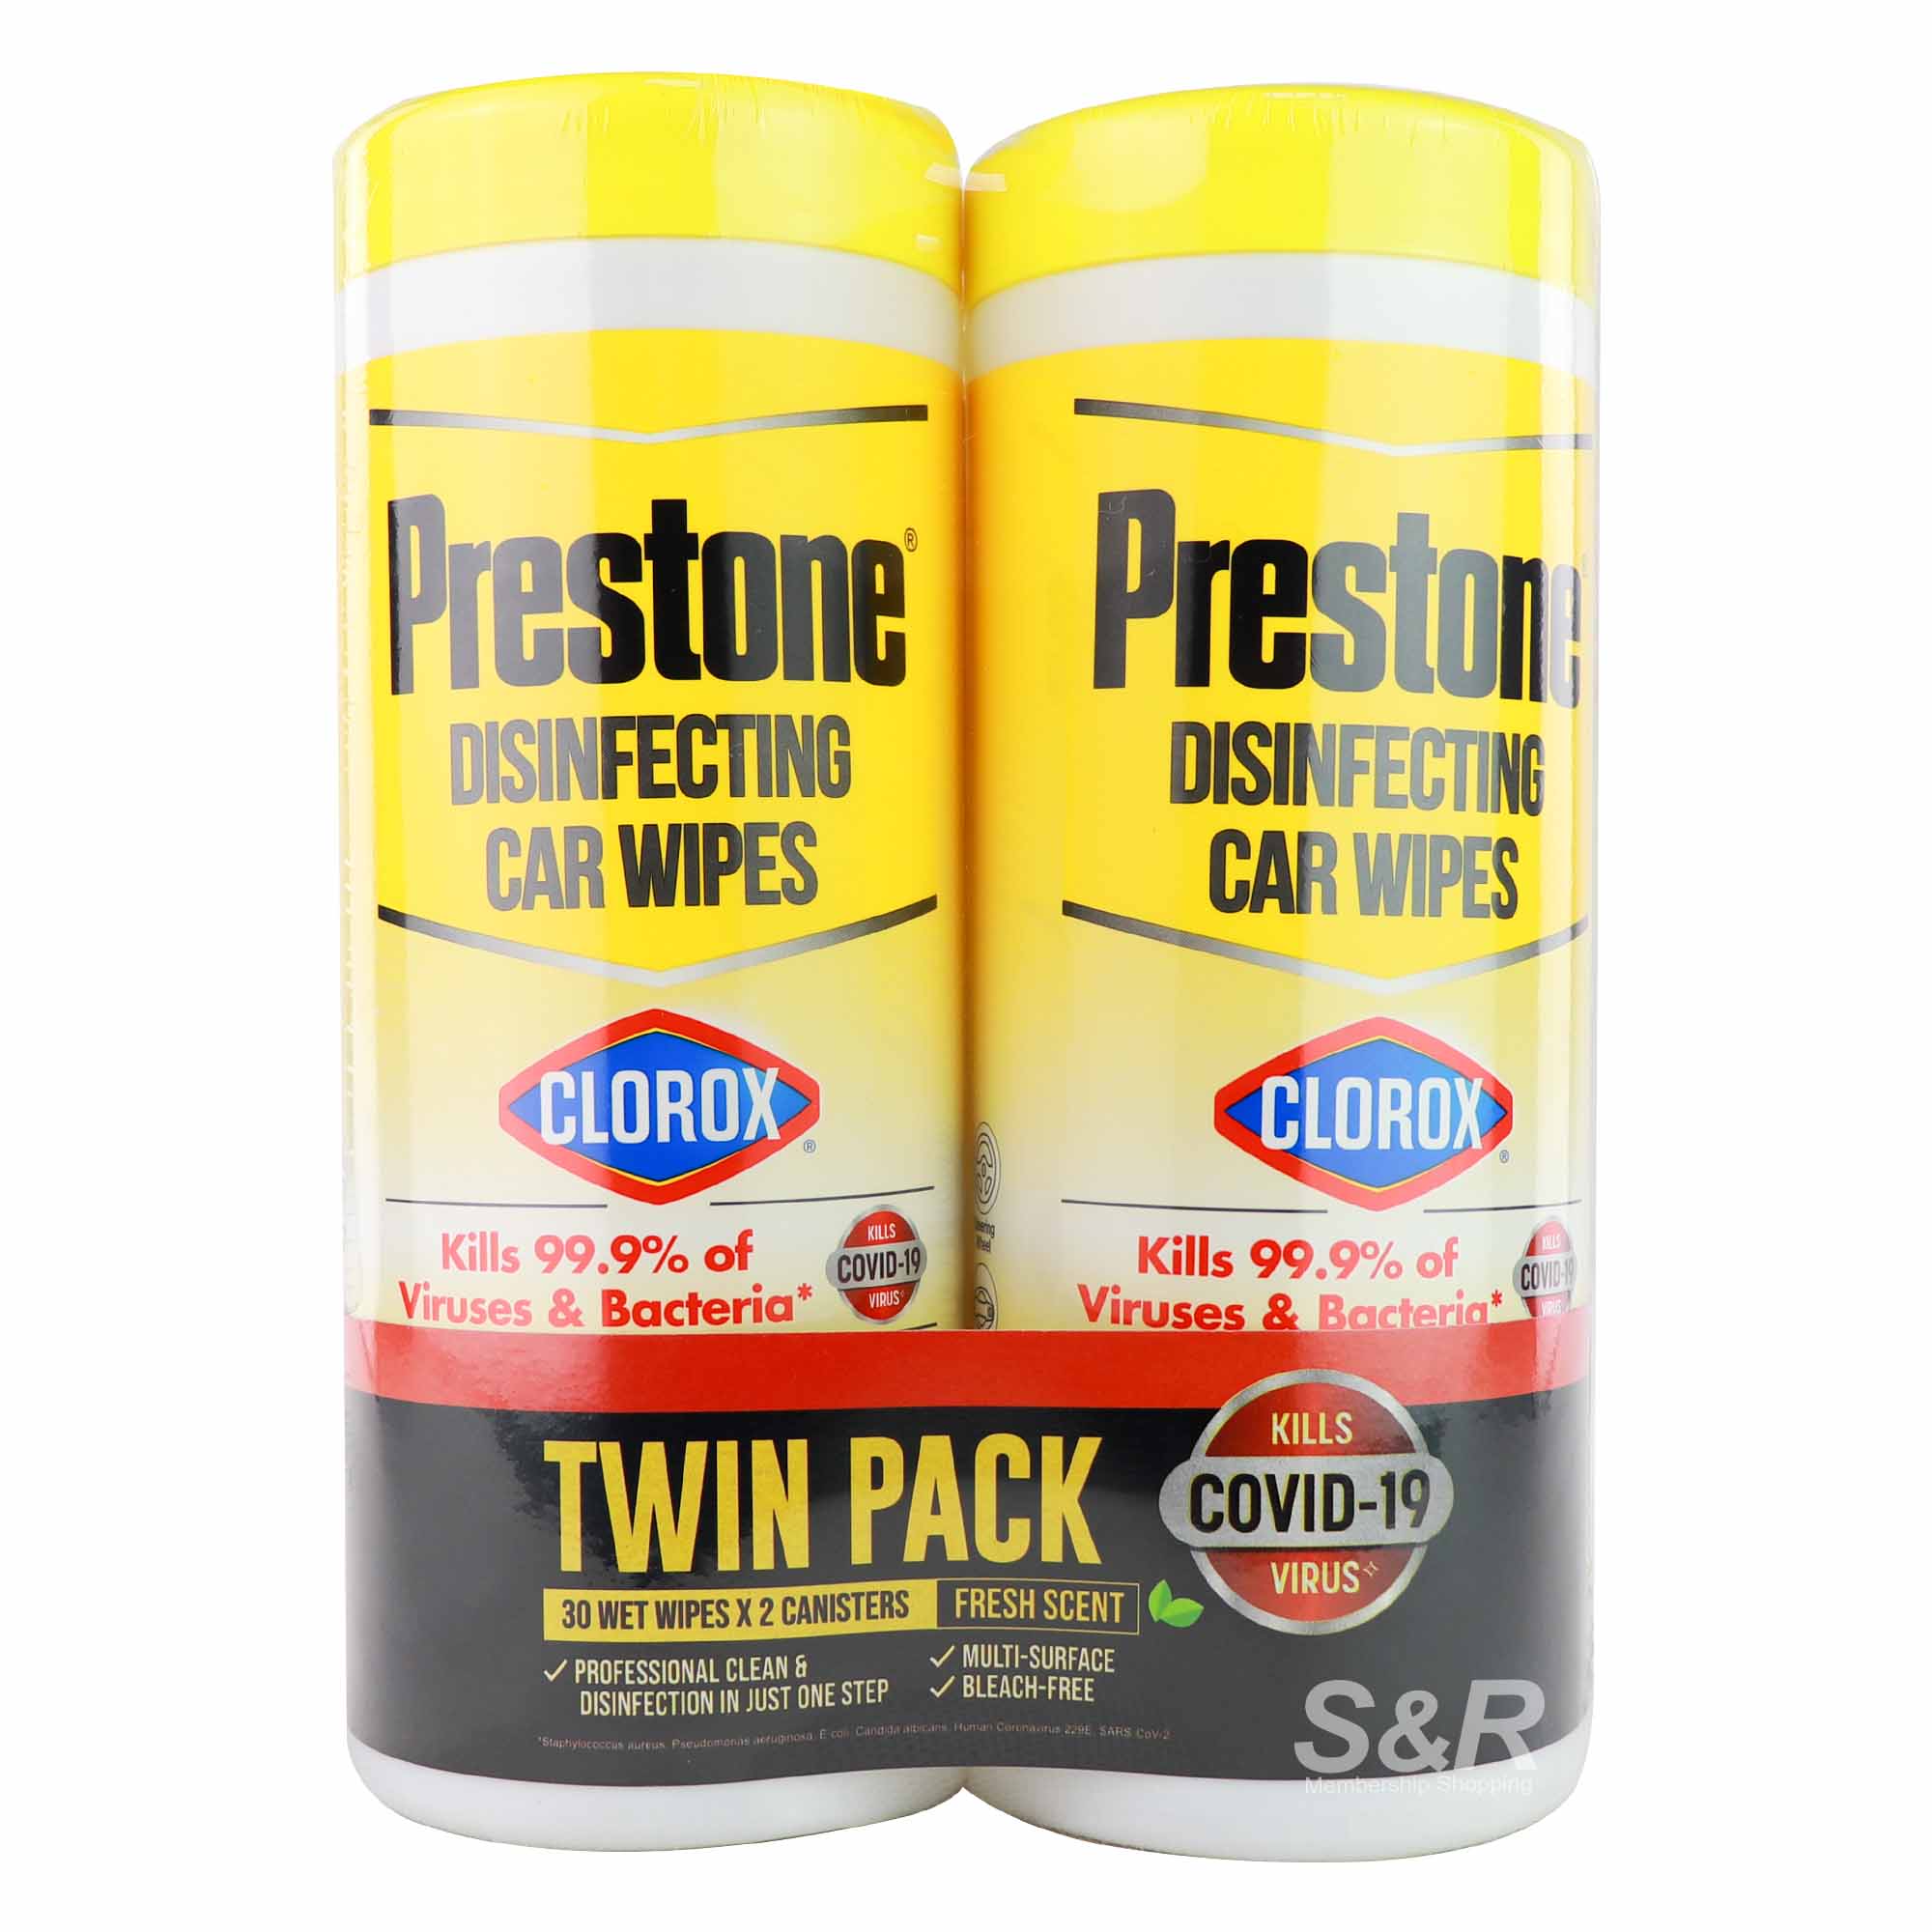 Prestone Disinfecting Car Wipes Twin Pack